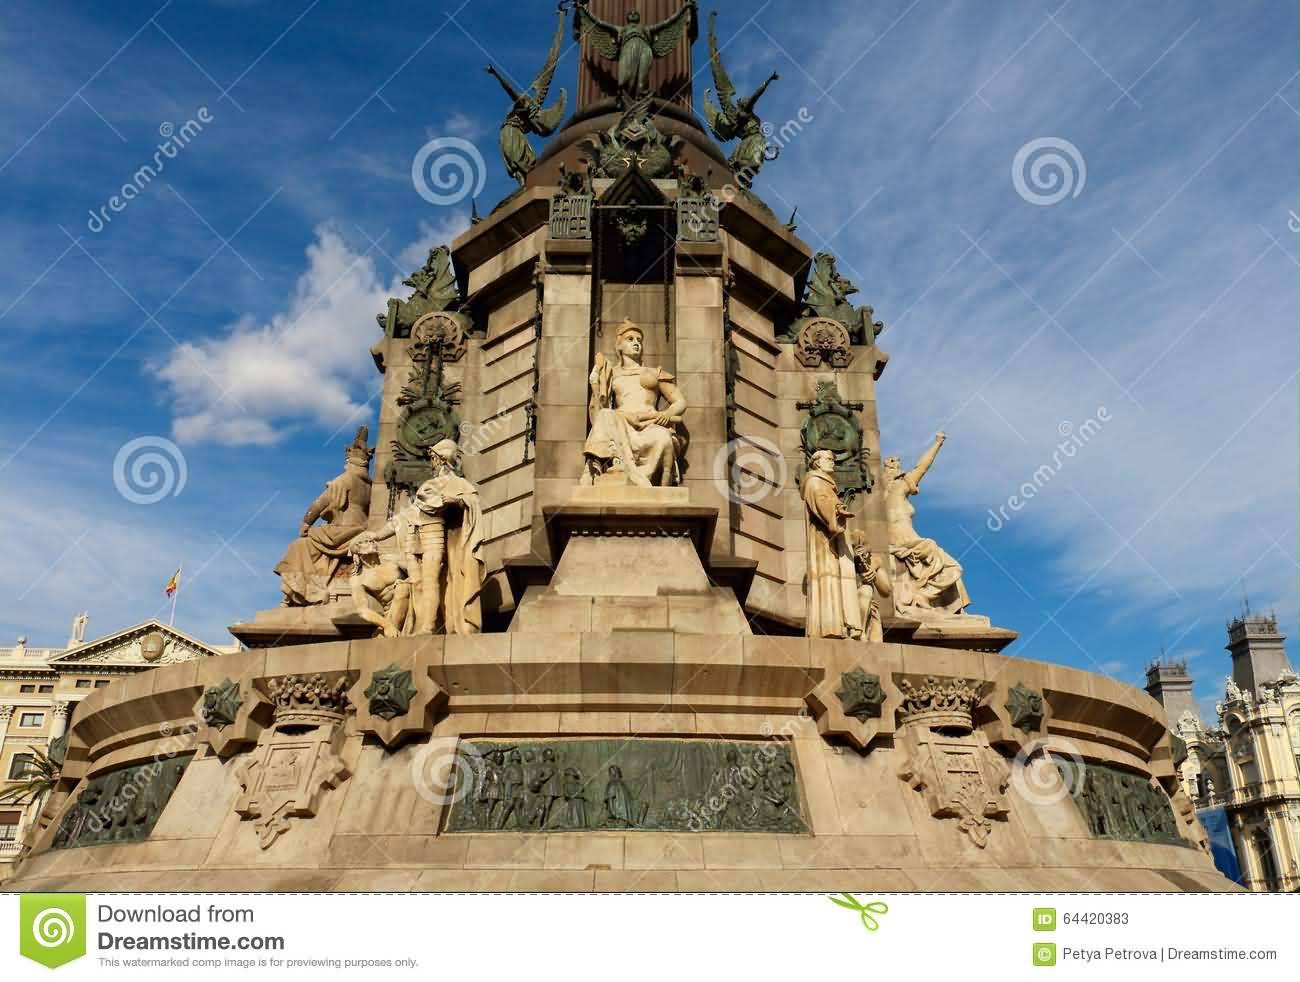 Statues On The Pedestal Of Columbus Monument In Barcelona